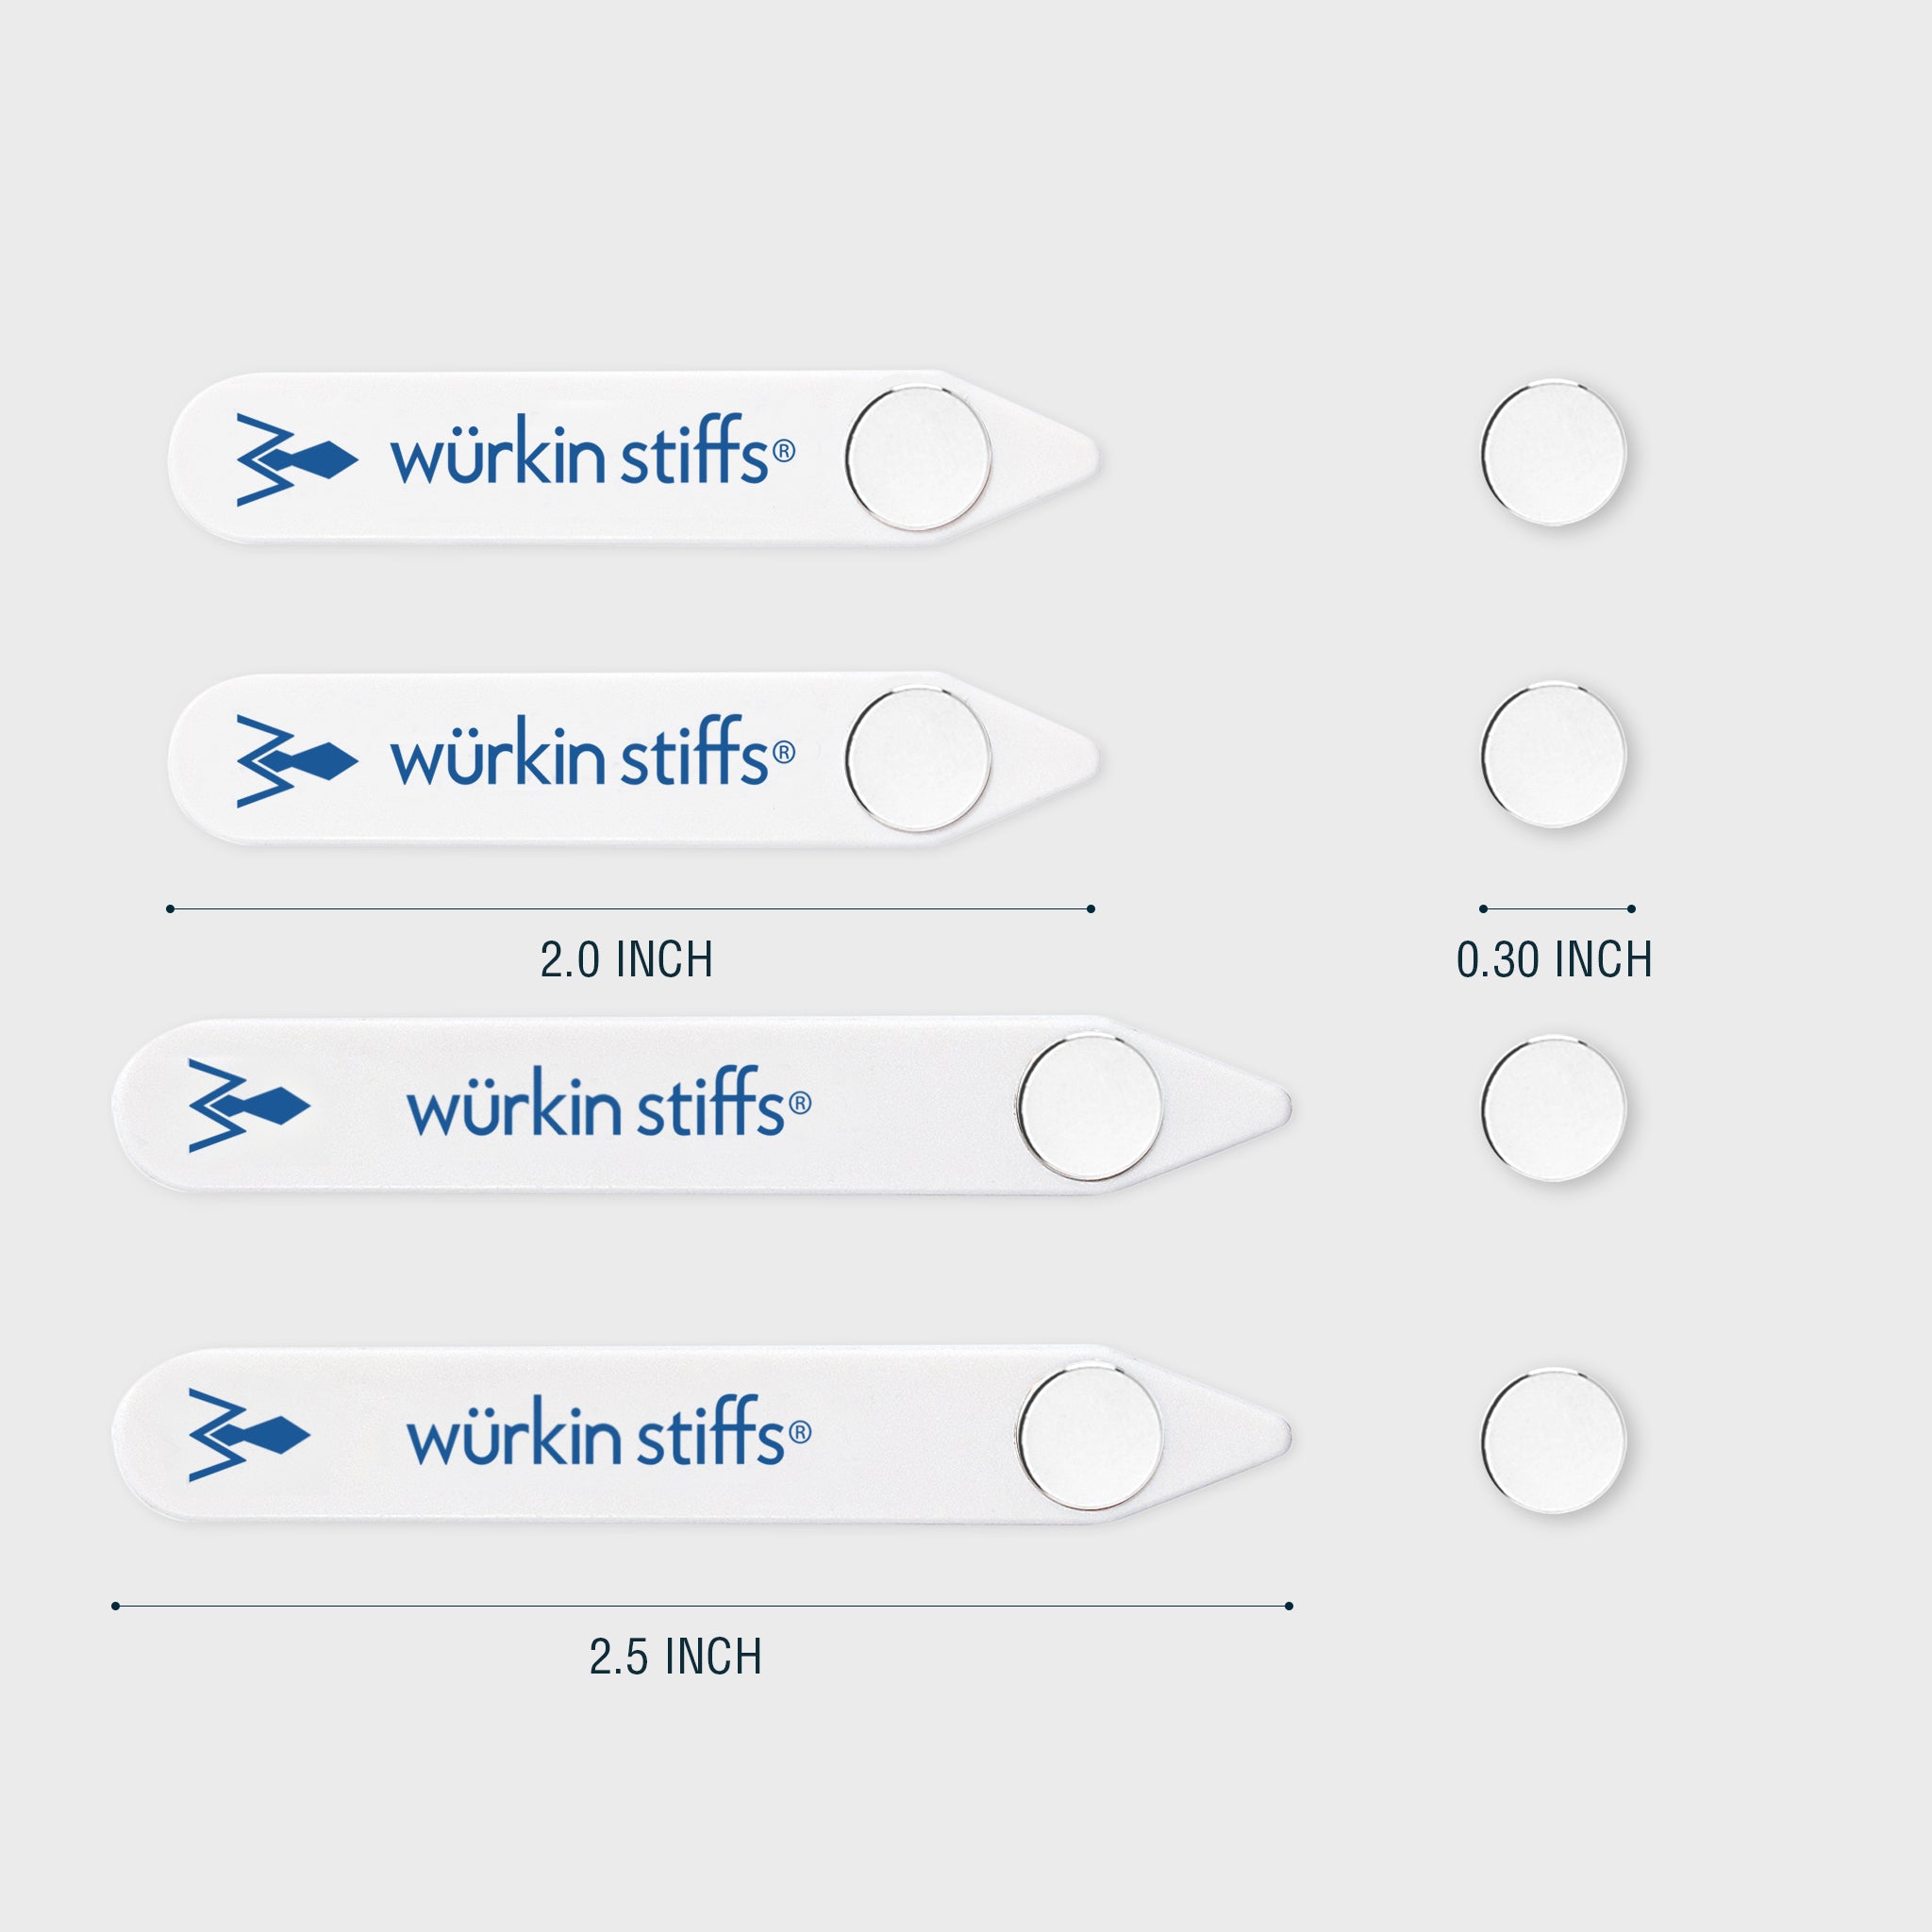 Stick-N-Stays Magnetic Collar Stays by Würkin Stiffs | Includes (10)  Magnetic Adhesive Polo Stays and (2) Power Button Magnets | Gift for Men |  As